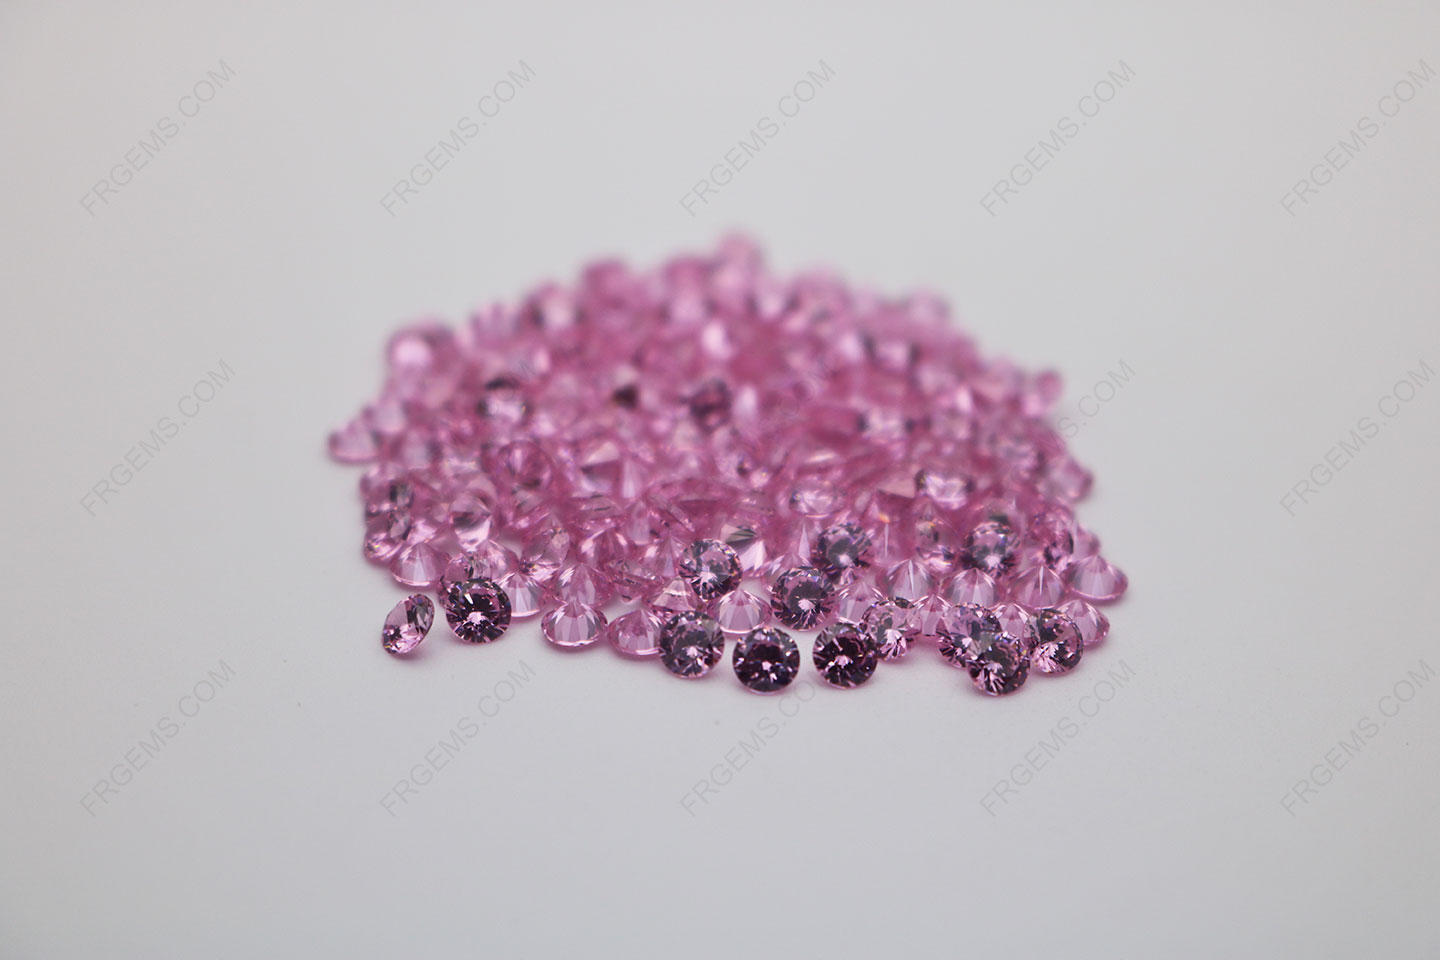 Cubic_Zirconia_Pink_Round_Shape_diamond_faceted_cut_5mm_stones_IMG_0344